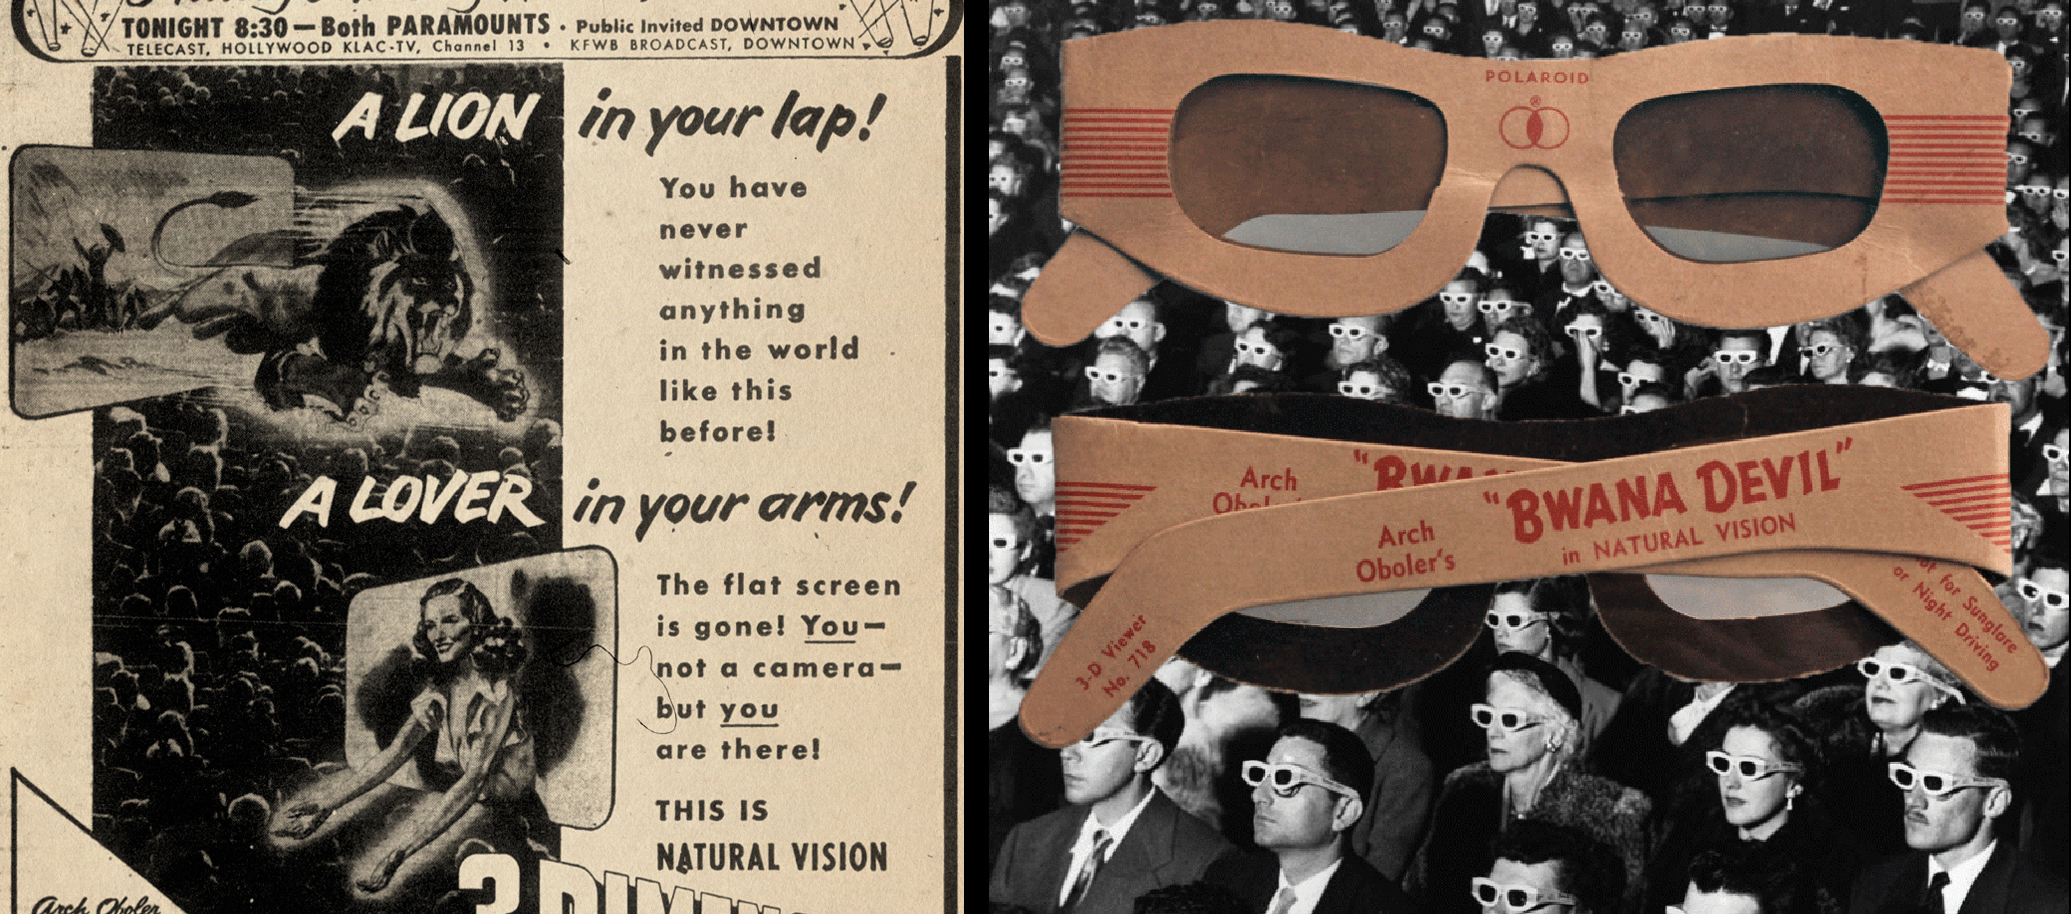 An advertisement for Bwana Devil is shown on the left with an image of an audience from 1952 wearing 3D glasses on the right.